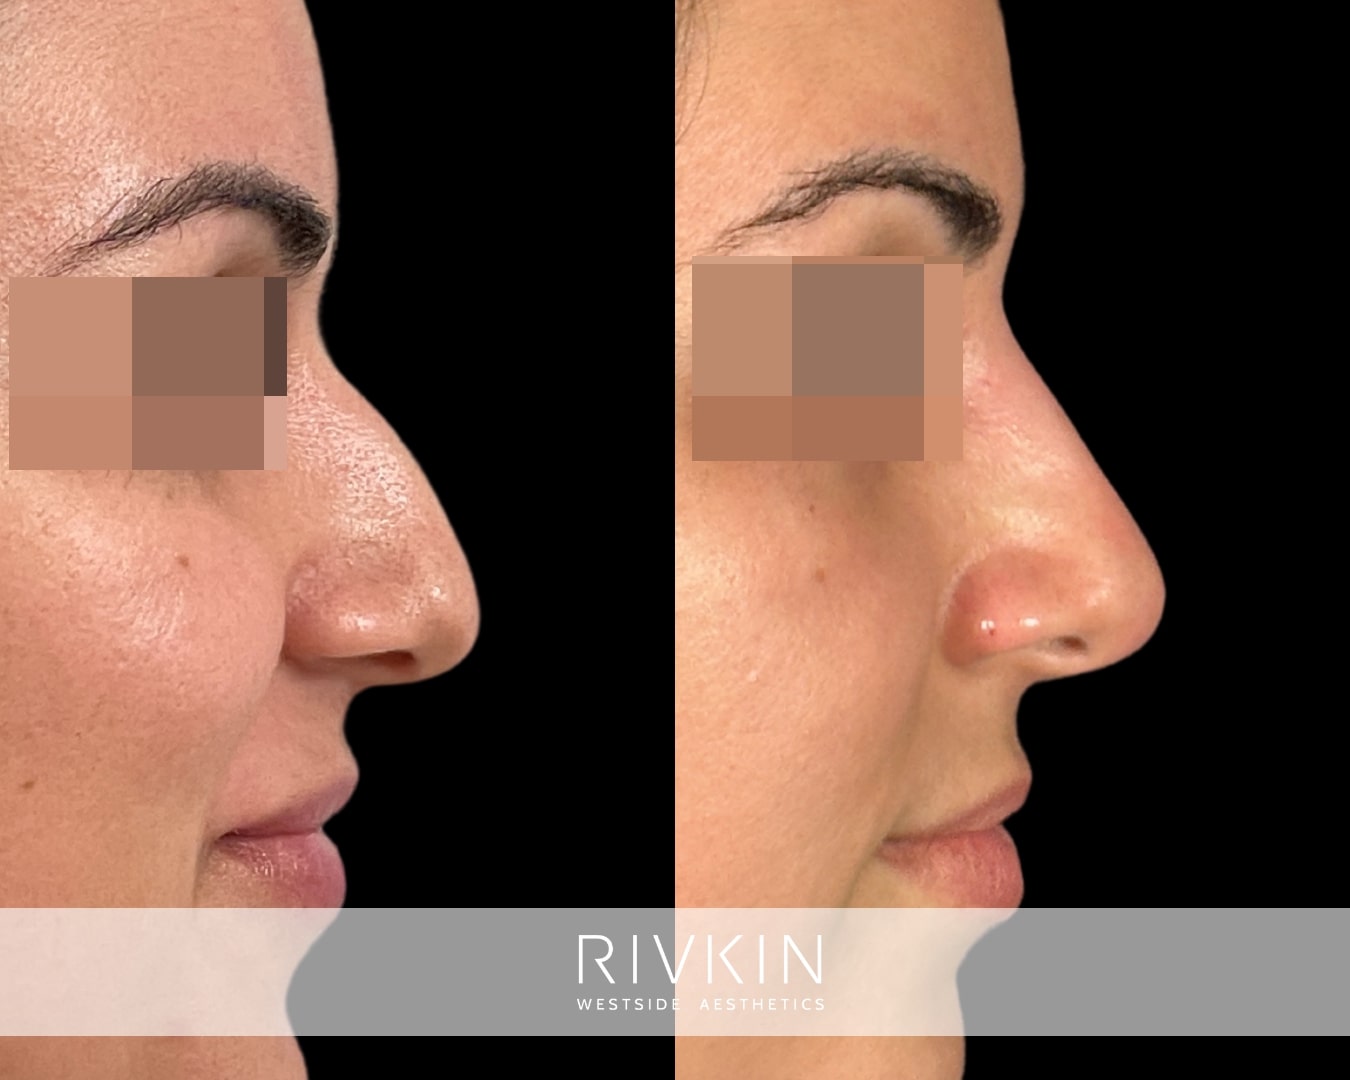 This patient's profile is harmonious and balanced now thanks to nurse practitioner Bahareh who performed her liquid rhinoplasty.